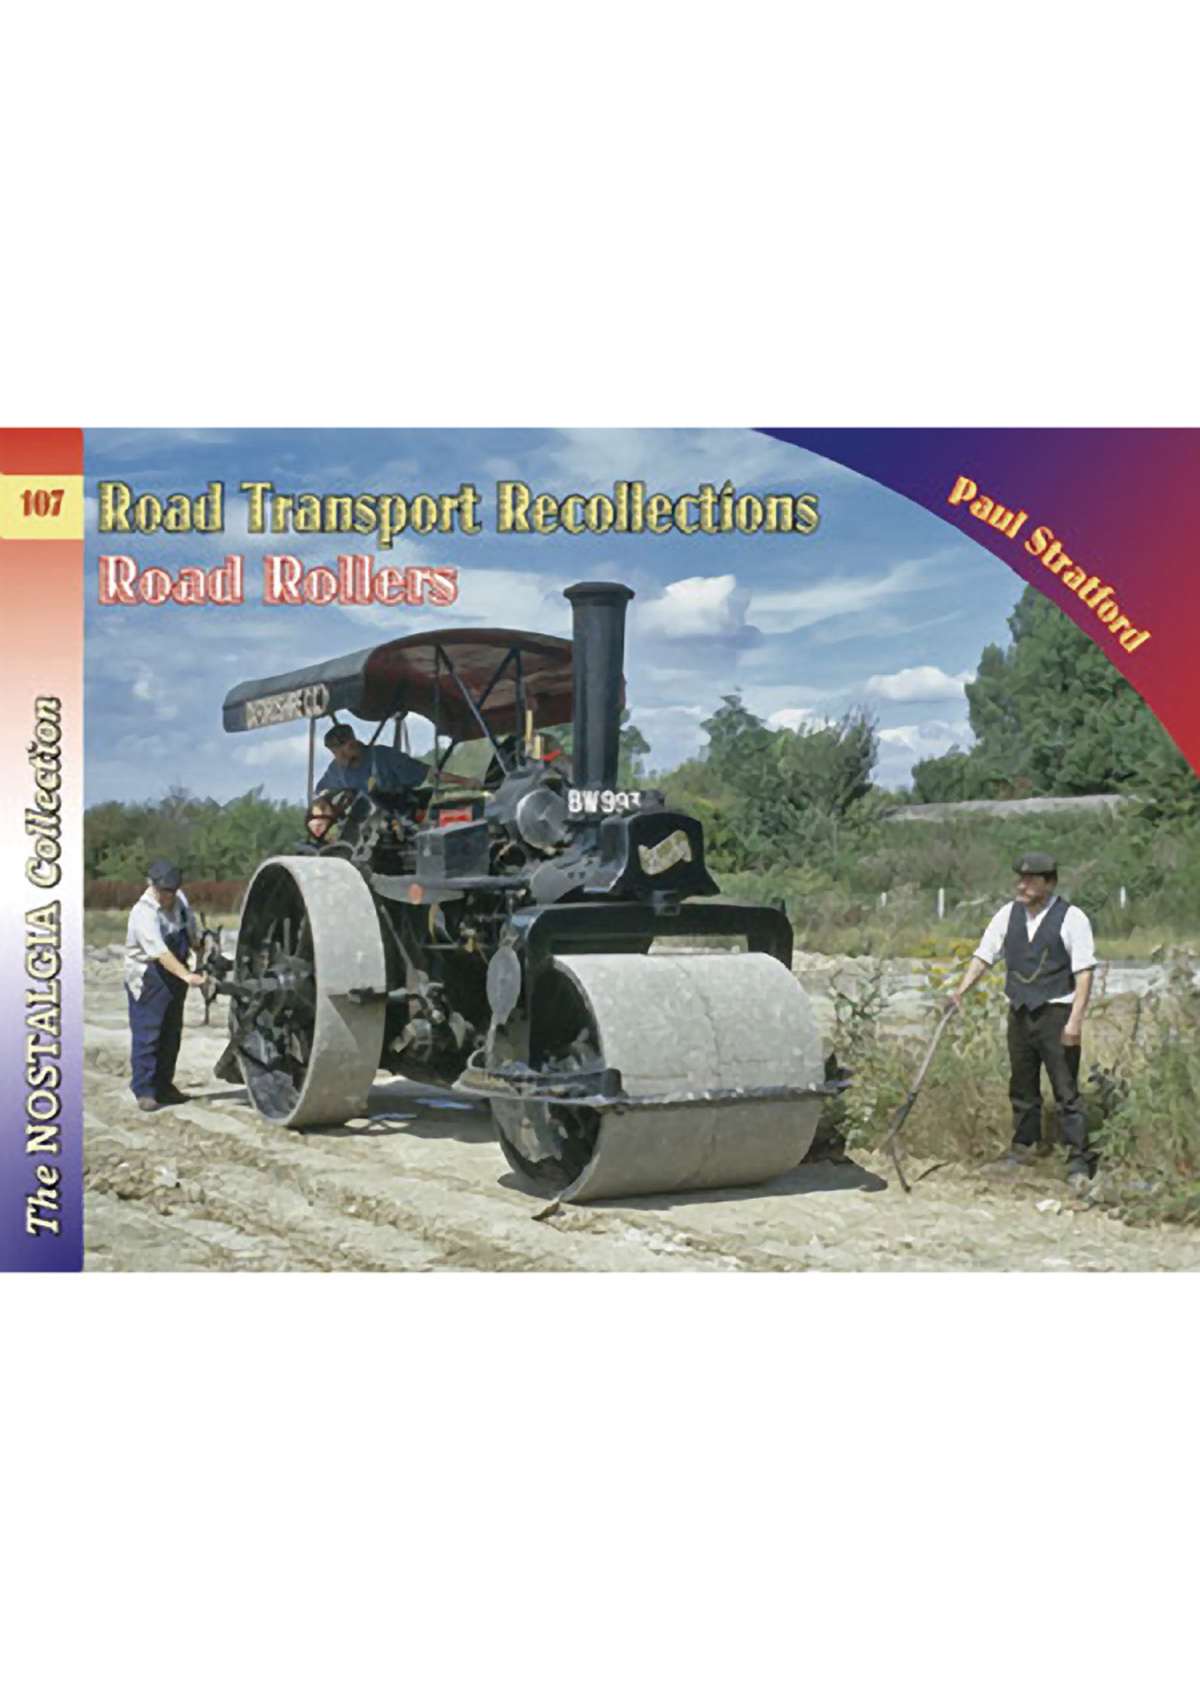 5539 - Vol 107 Road Transport Recollections: Road Rollers